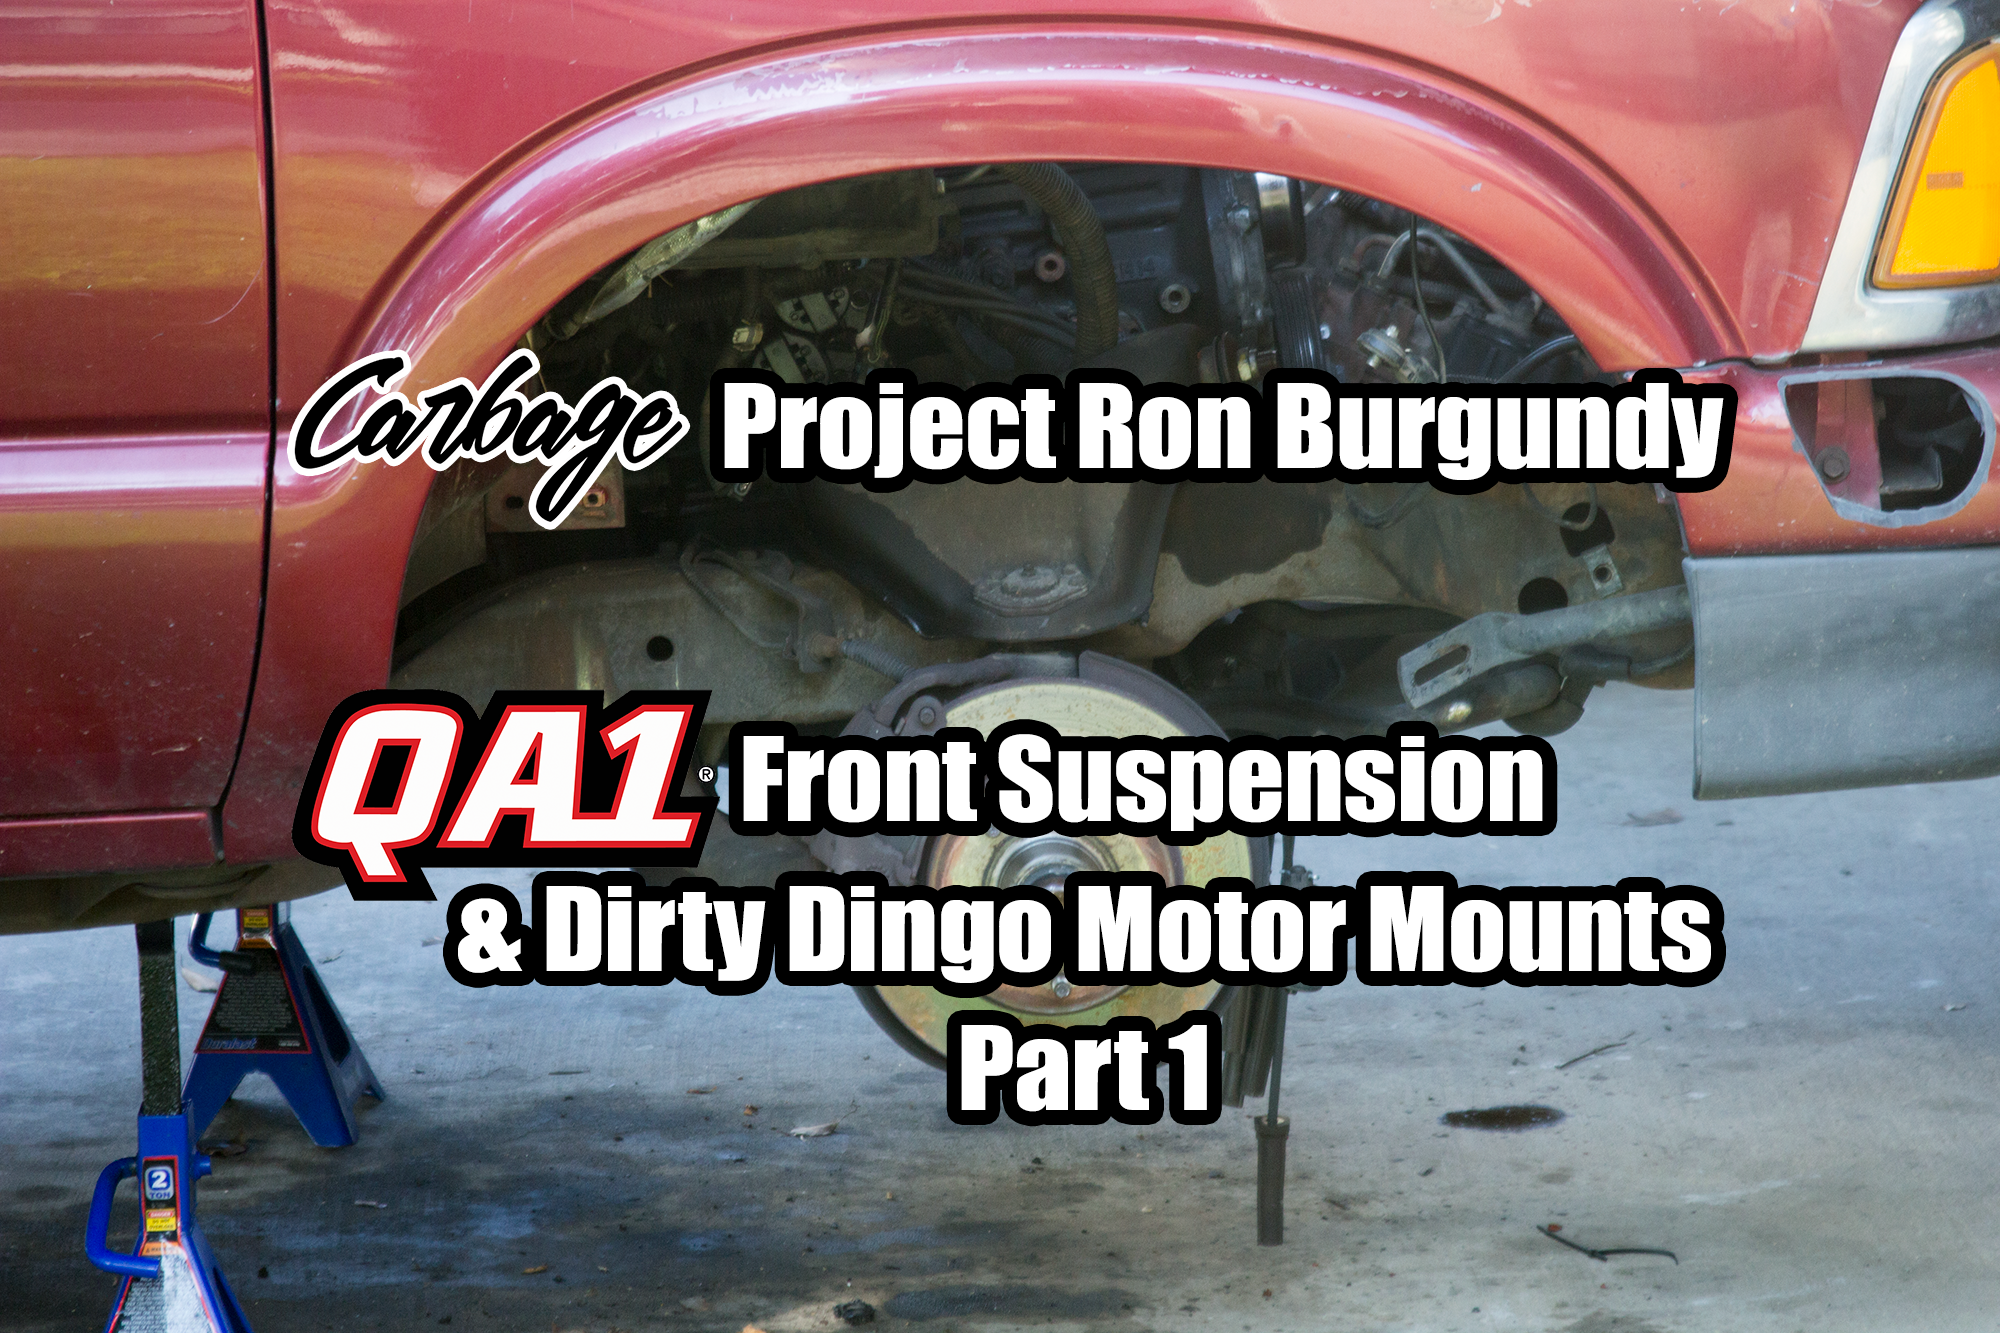 LS1tech.com Project Ron Burgundy LS Swap S10 Chevy LH6 V8 Texas Speed and Performance QA1 Suspension